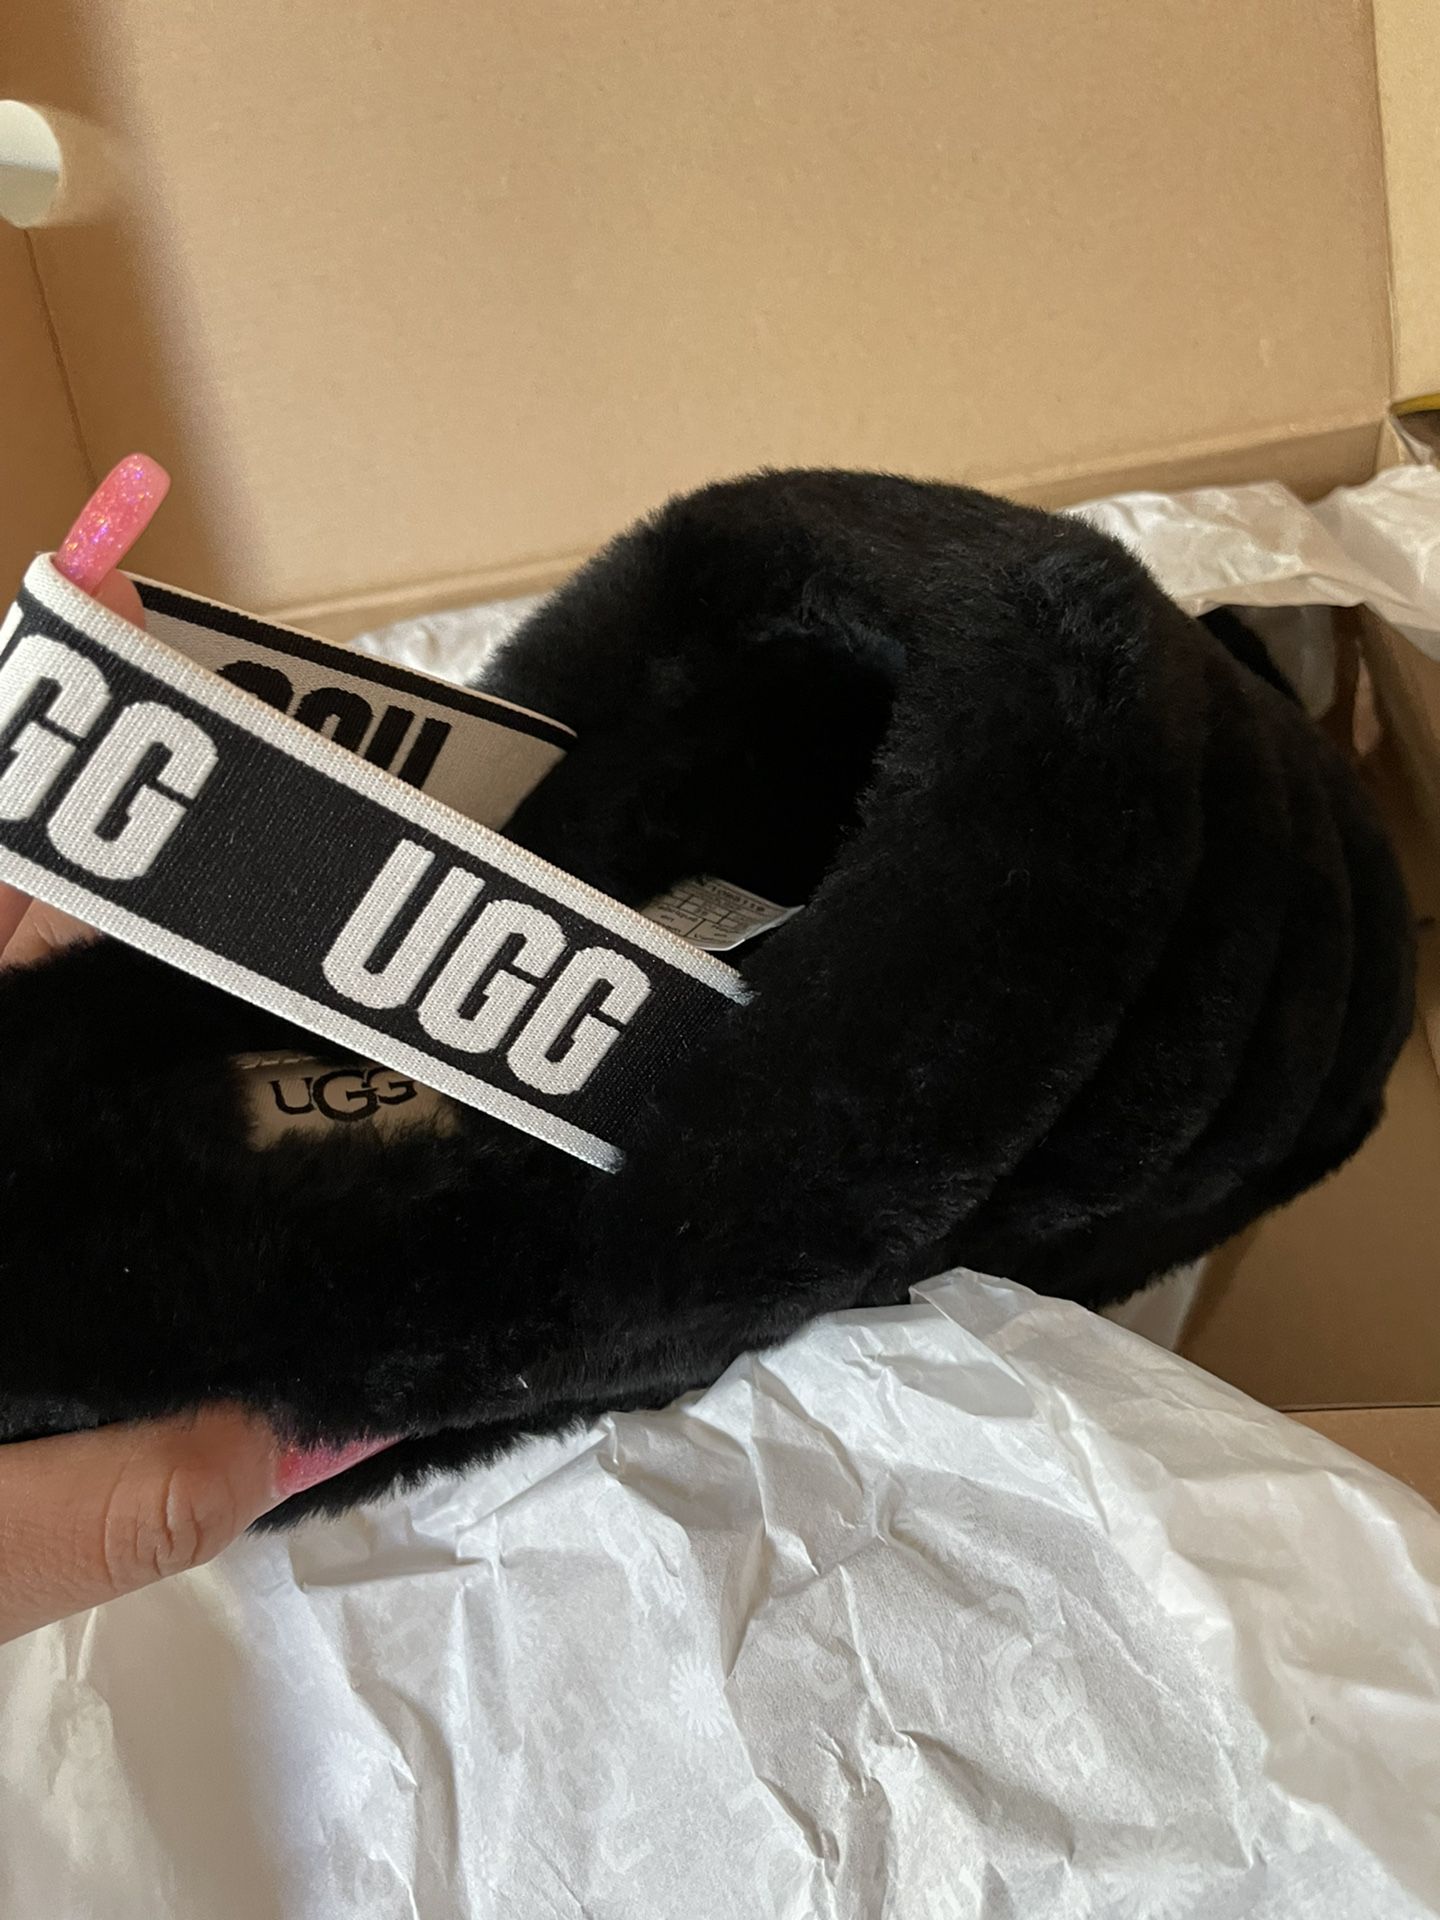 Uggs Woman’s Size 8 Brand New Still In Box 